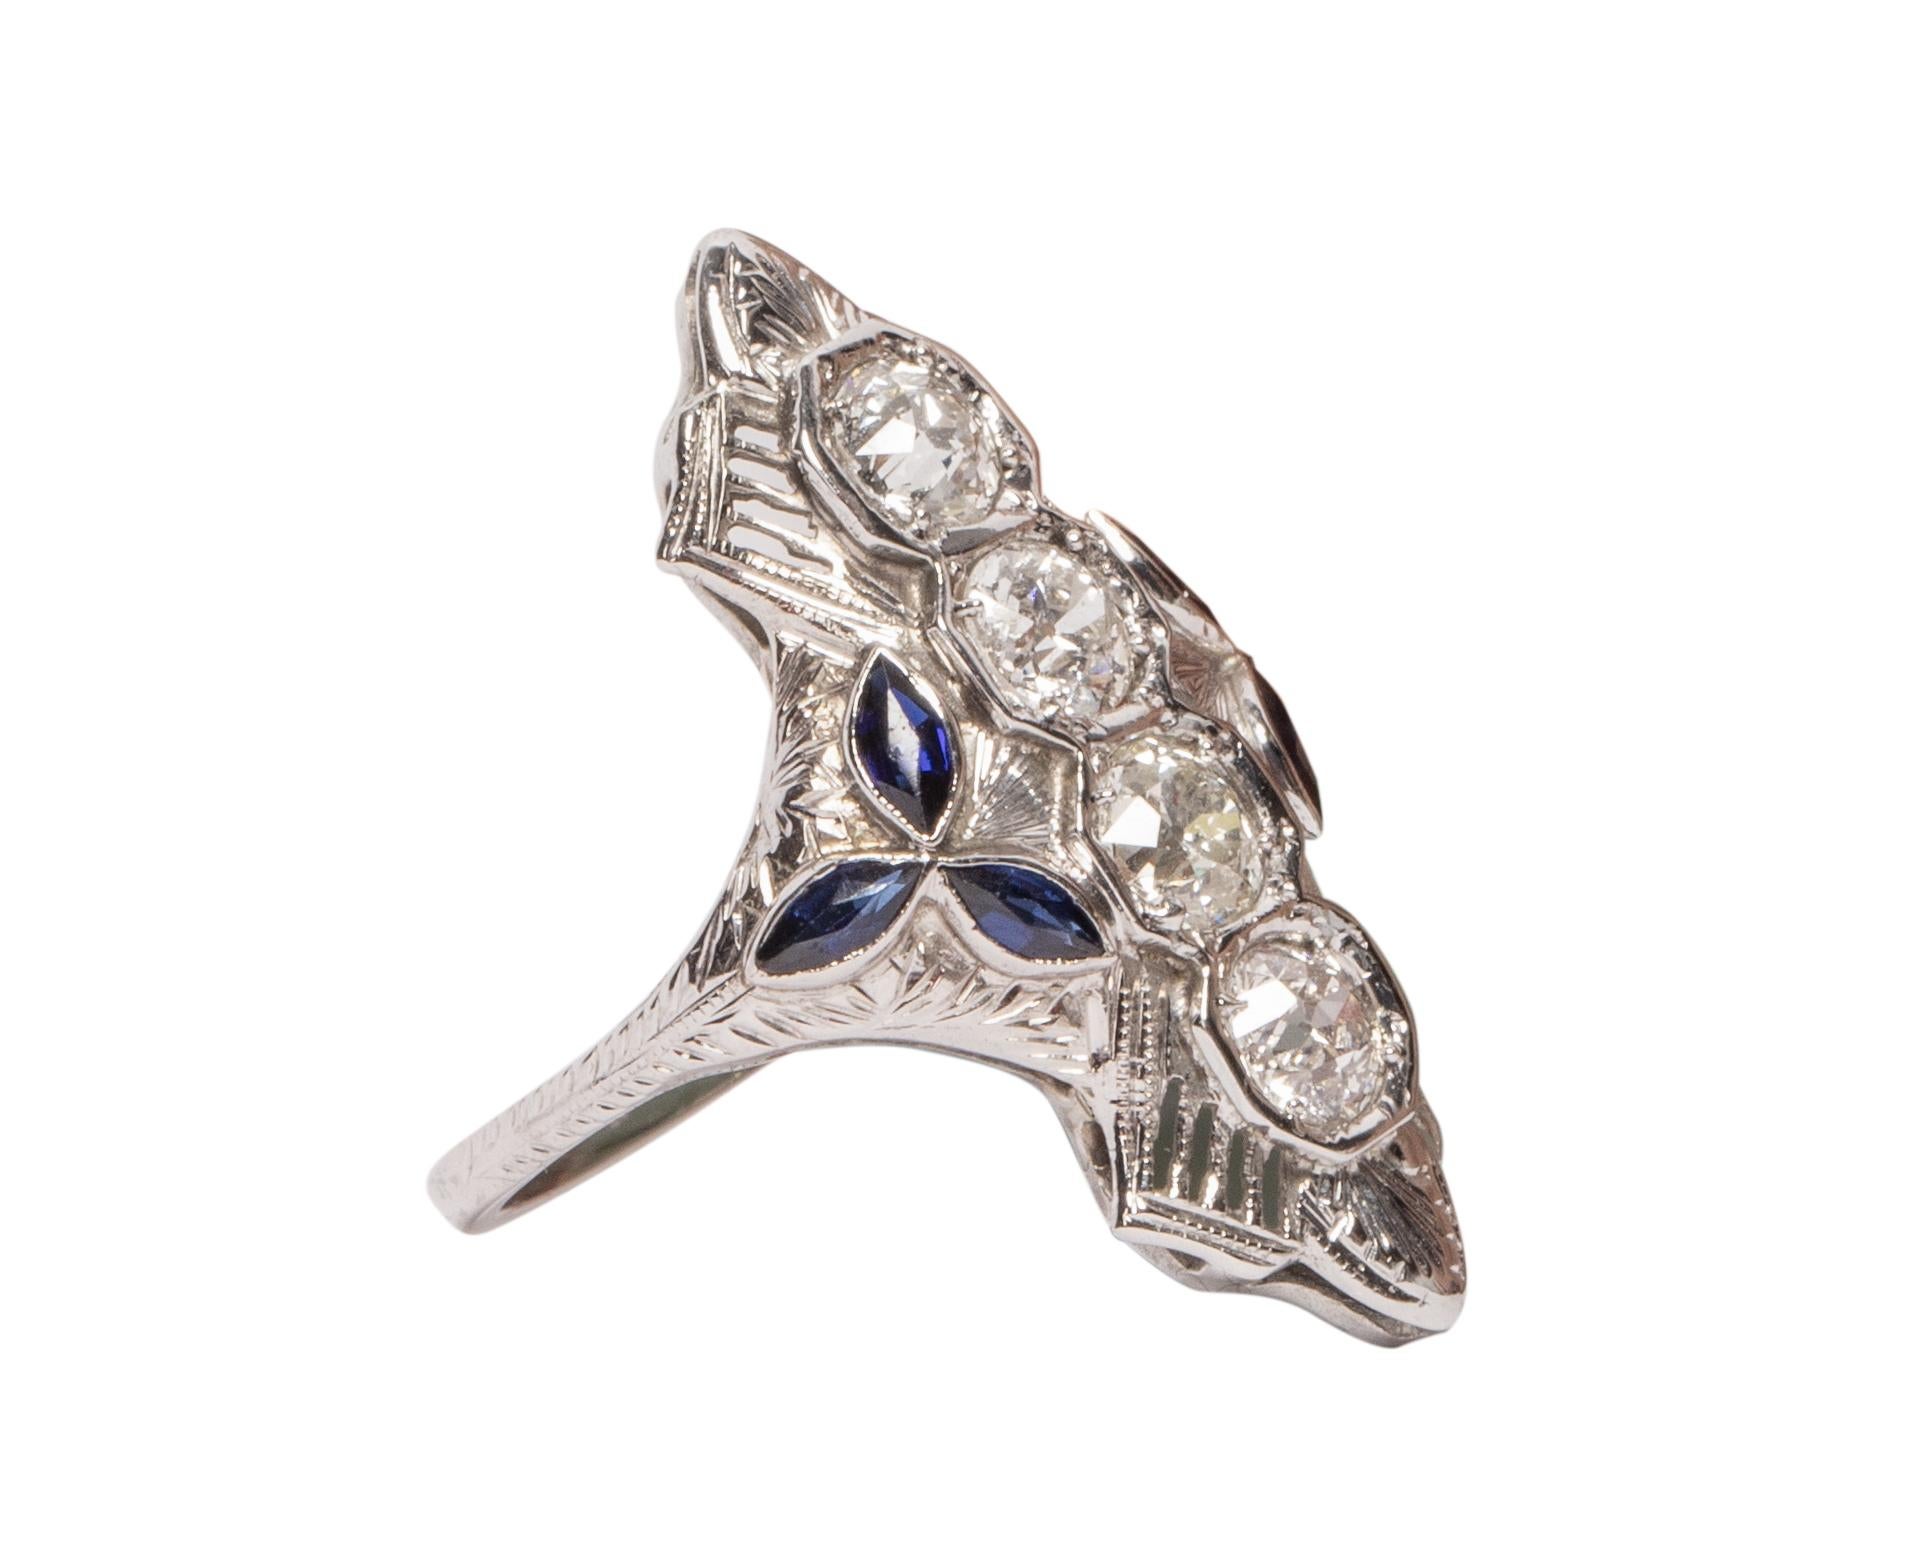 This lovely example of an Art Deco shield ring is crafted of stunning 18k white gold. Intricate filigree designs surround 3 sparkling diamonds on this vintage beauty. Two sapphire pyramids add a pop of color that adds to this already beautiful